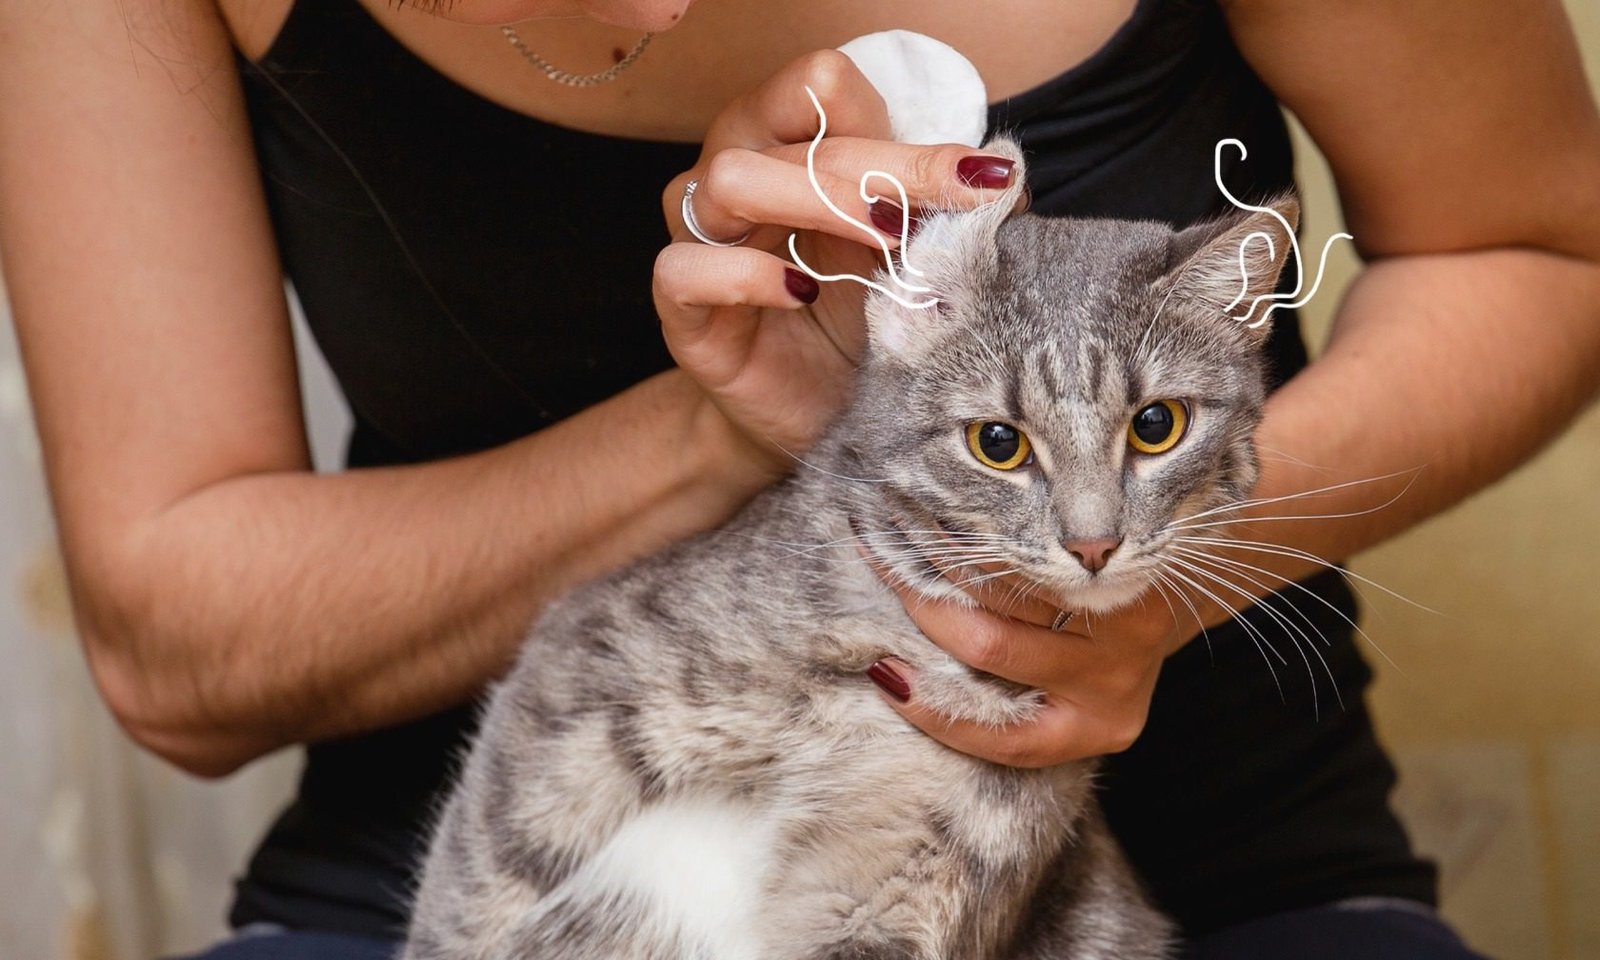 treatment options to address the underlying issue causing the head cat shaking.